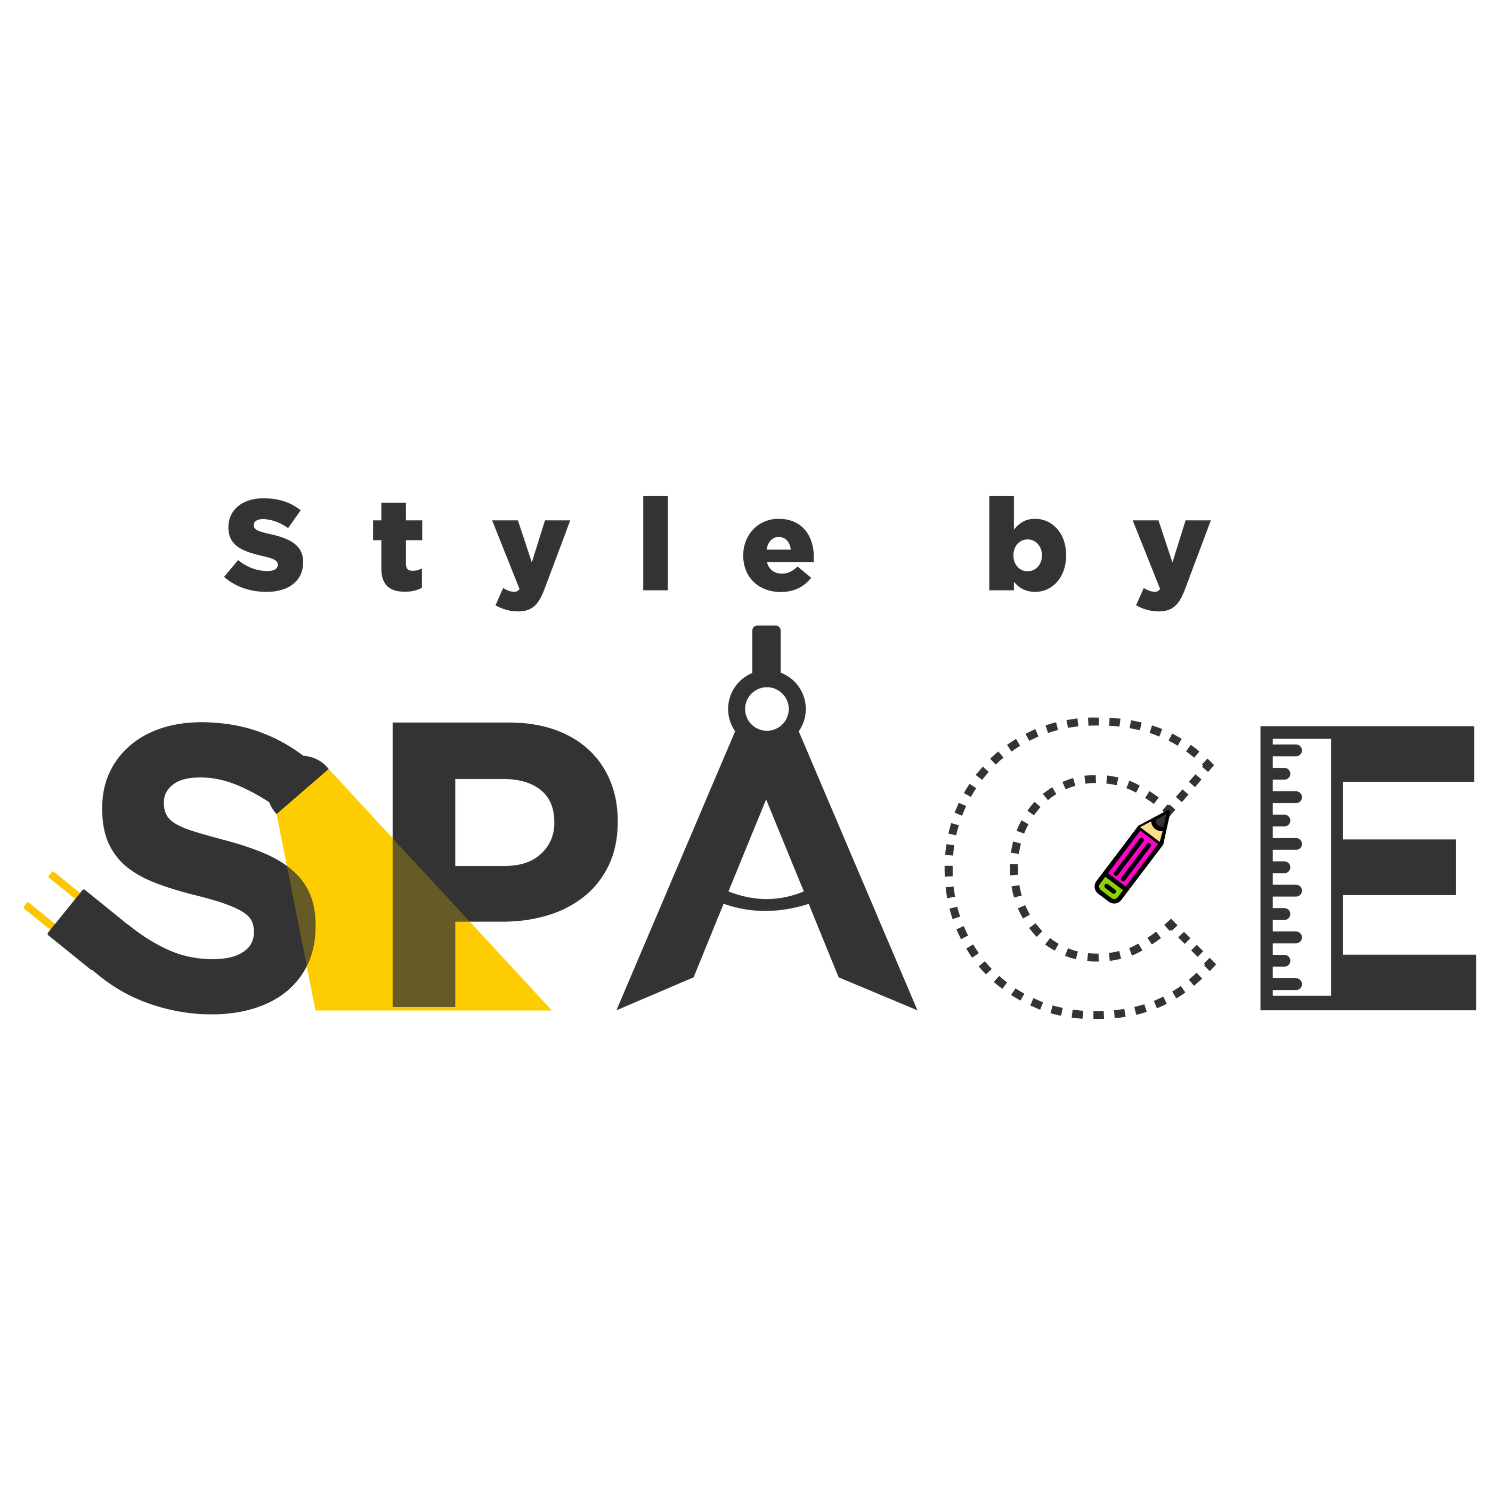 Style By Space